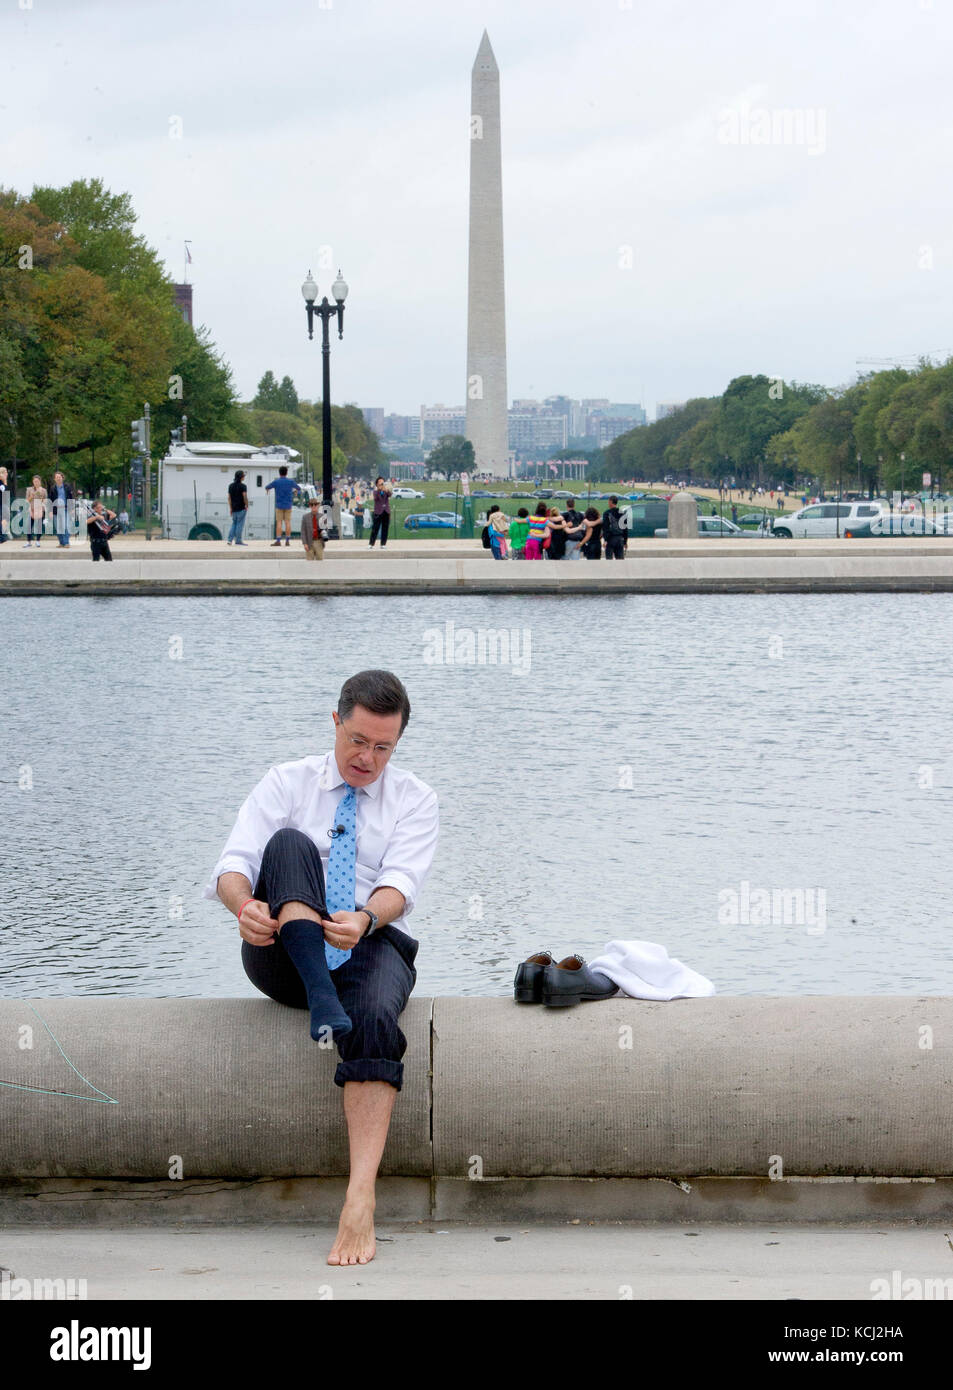 Stephen Colbert, host of the Comedy Central show 'The Colbert Report' puts his sox and shoes back on after working on a bit with United States Representative Jack Kingston (Democrat of Georgia) around the the U.S. Capitol Reflecting Pool in Washington, D.C. on Friday, October 3, 2014. Credit: Ron Sachs / CNP (RESTRICTION: NO New York or New Jersey Newspapers or newspapers within a 75 mile radius of New York City) /MediaPunch Stock Photo